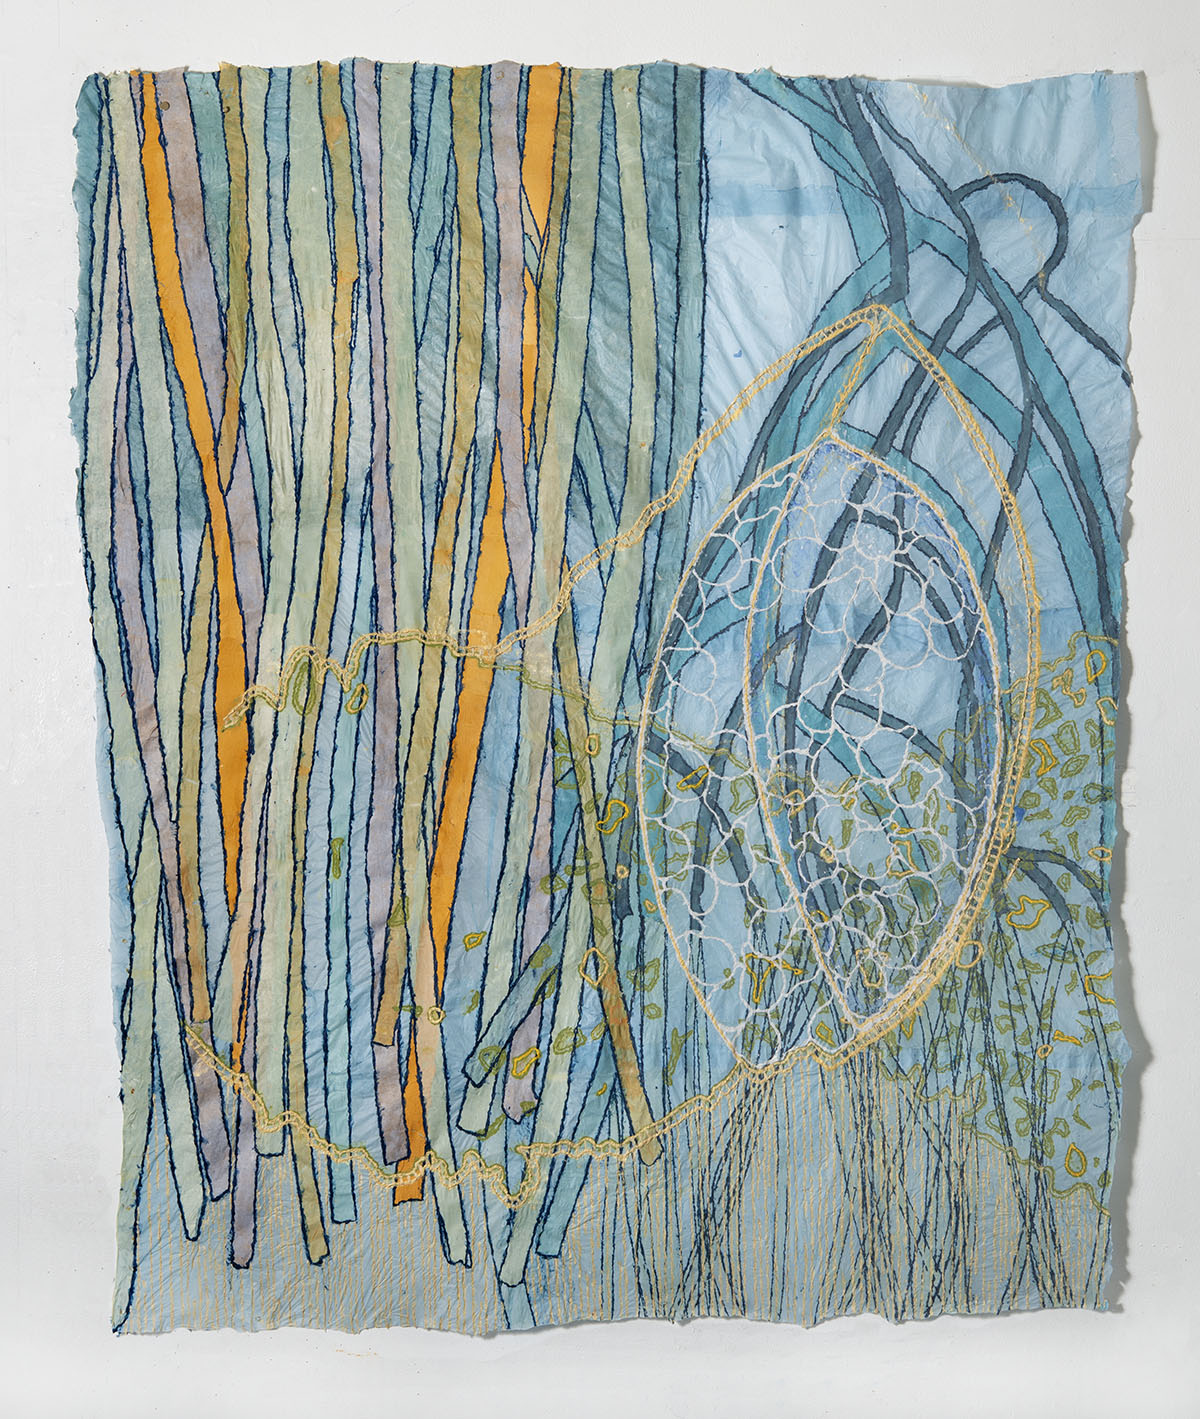 Nancy Cohen, Scrim (2019). Paper pulp, ink and handmade paper. Dimensions: 52” x 45”. ©Nancy Cohen 2019. Courtesy of the artist and Kathryn Markel Fine Arts.   Cohen offers two views of mangroves: the bark supporting their towering heights and their tangled roots – habitat for oysters, shrimp and crabs. Hardy and ingenious, mangroves thrive where salt, temperature and water levels vary with the tide. Stilt-like roots prop mangrove breathing pores above muddy water and form massive, coast-protecting barriers against strong waves.   Scrim is both a tribute to an eco-tourism paradise and a plea for humans to respect this vulnerable ecology. 